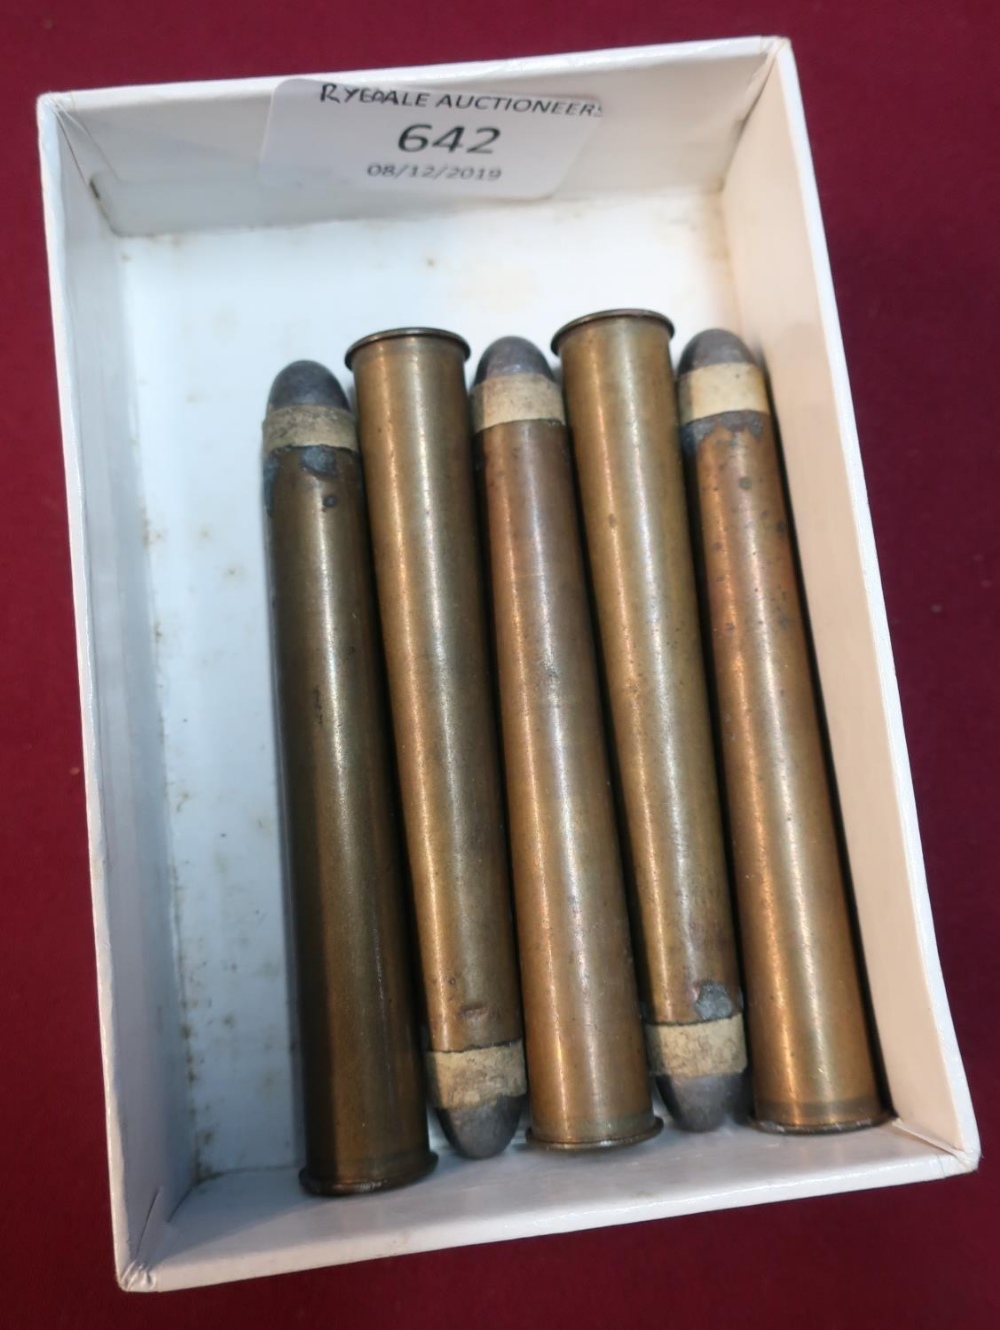 Five Eley .450 rifle rounds (section 1 certificate required)